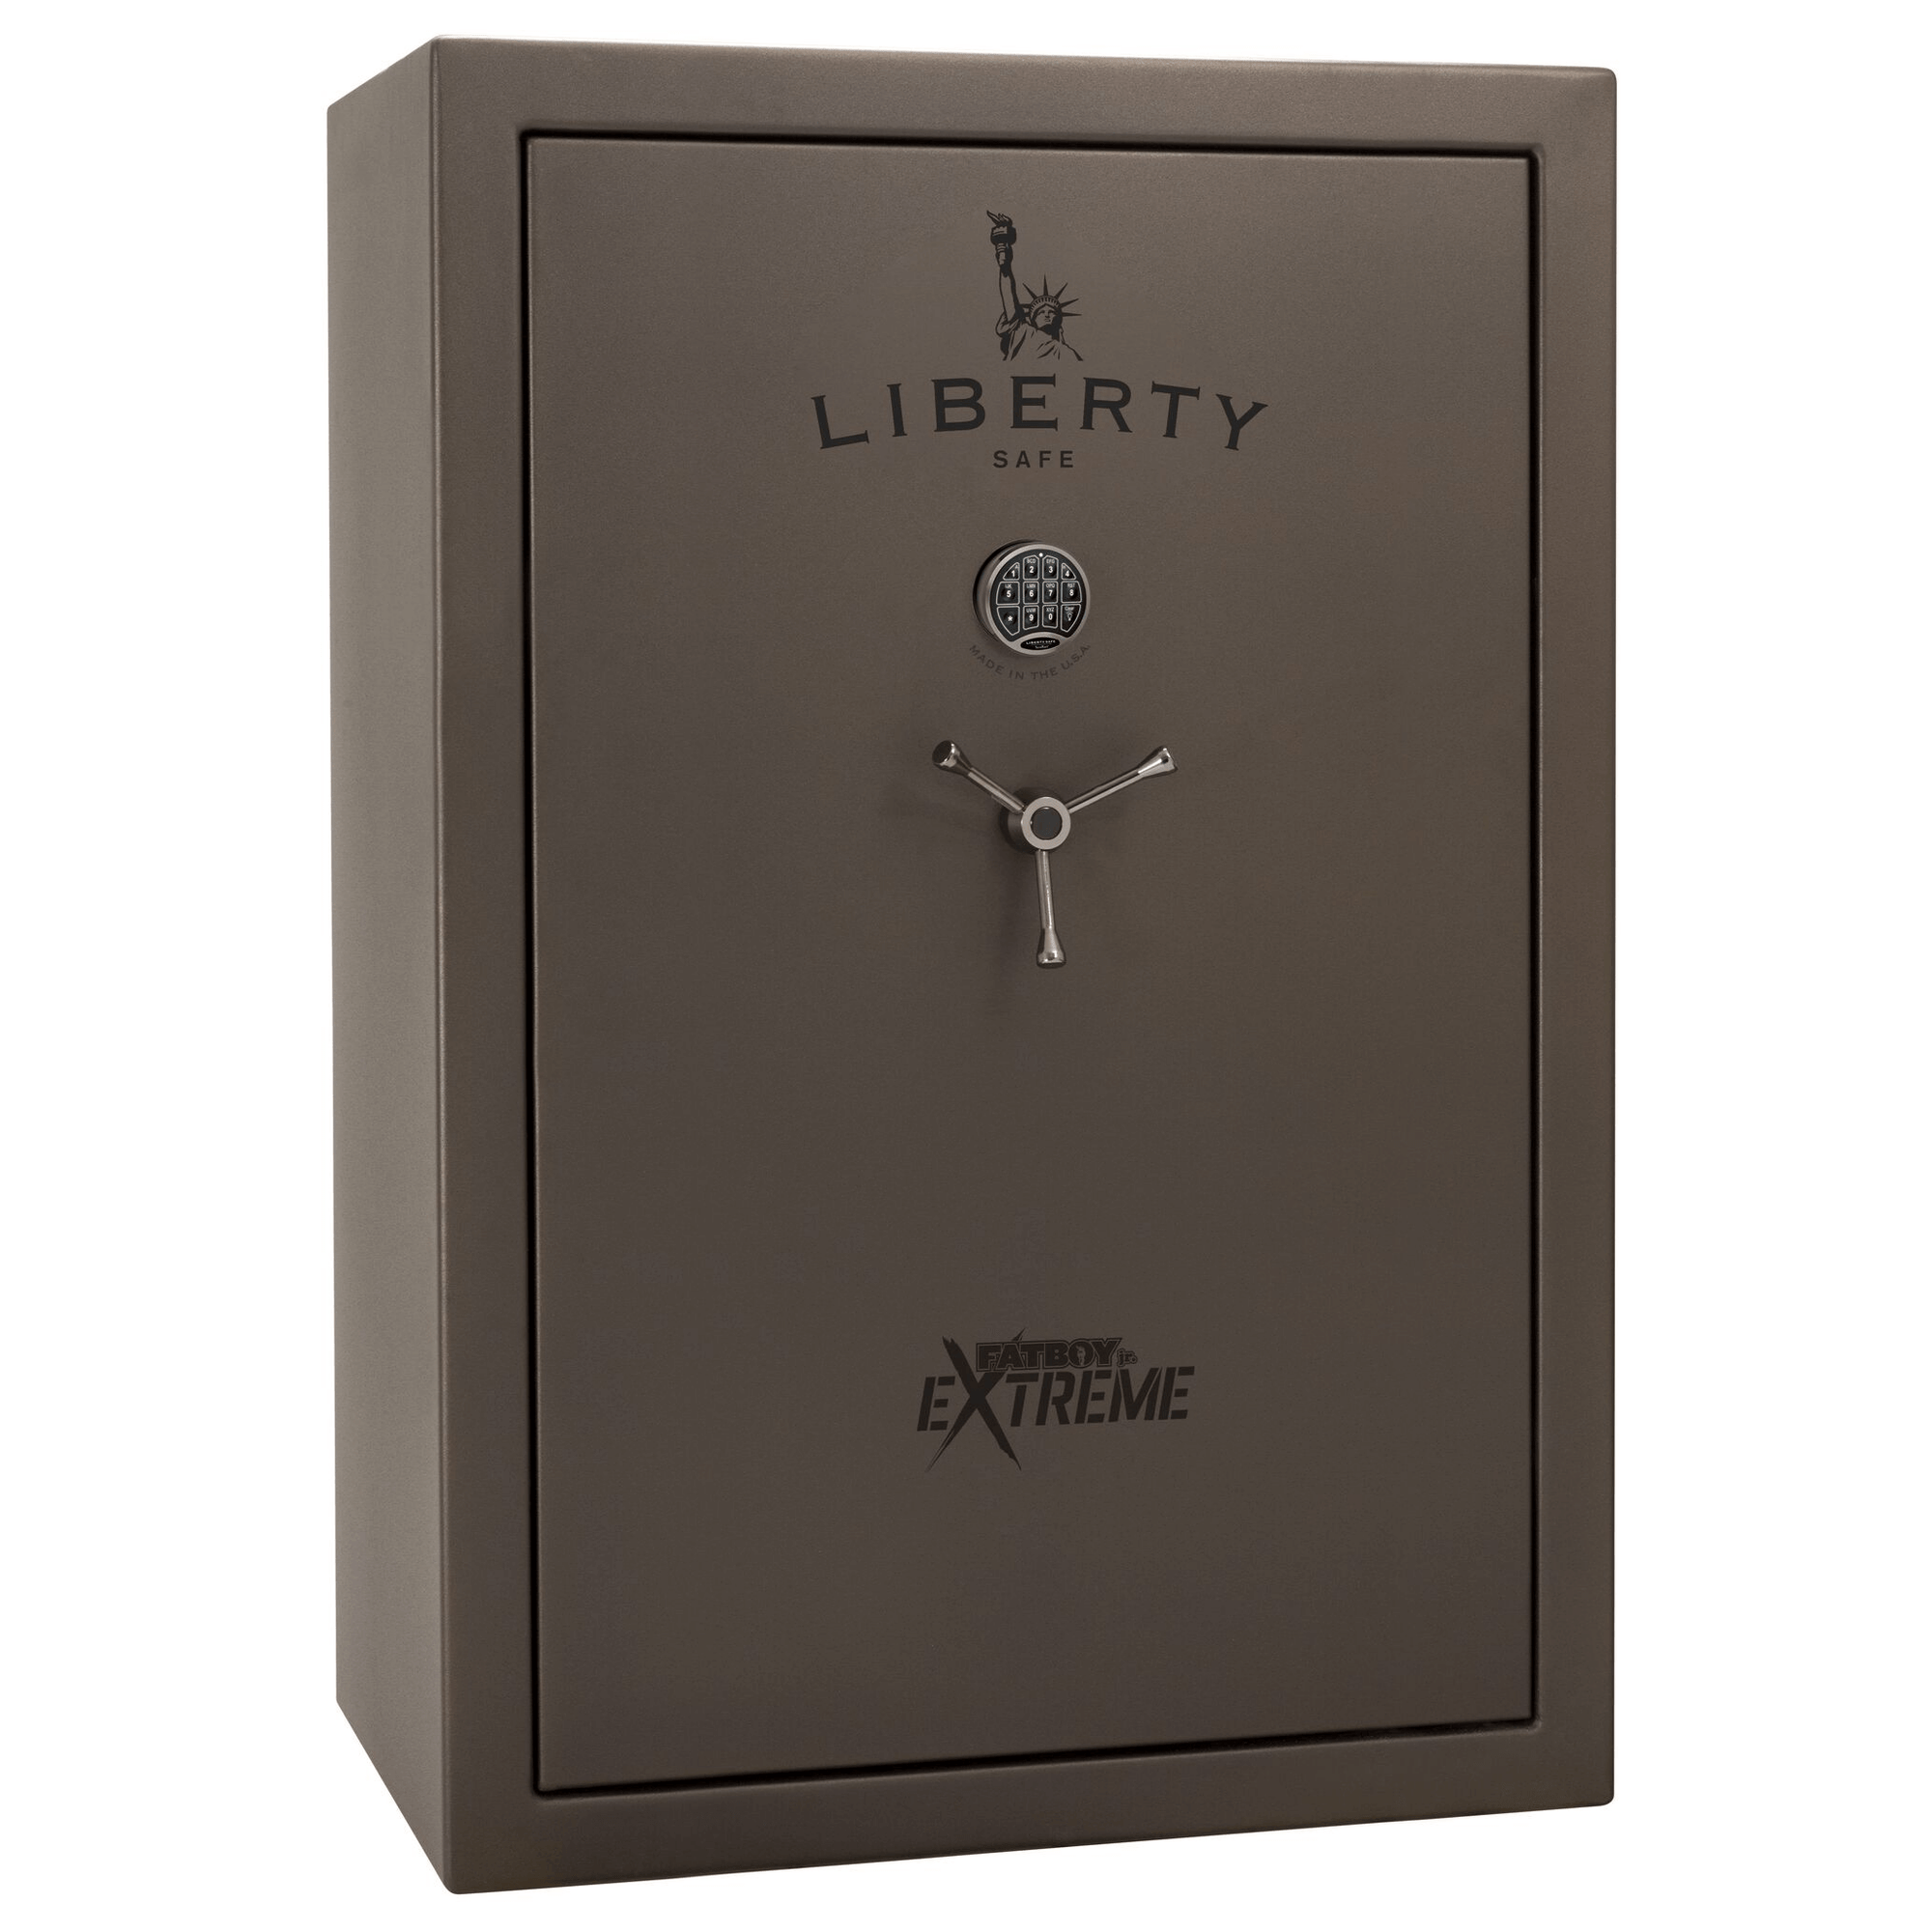 Fatboy Junior Extreme Safe in Textured Bronze with Black Chrome Electronic Lock.